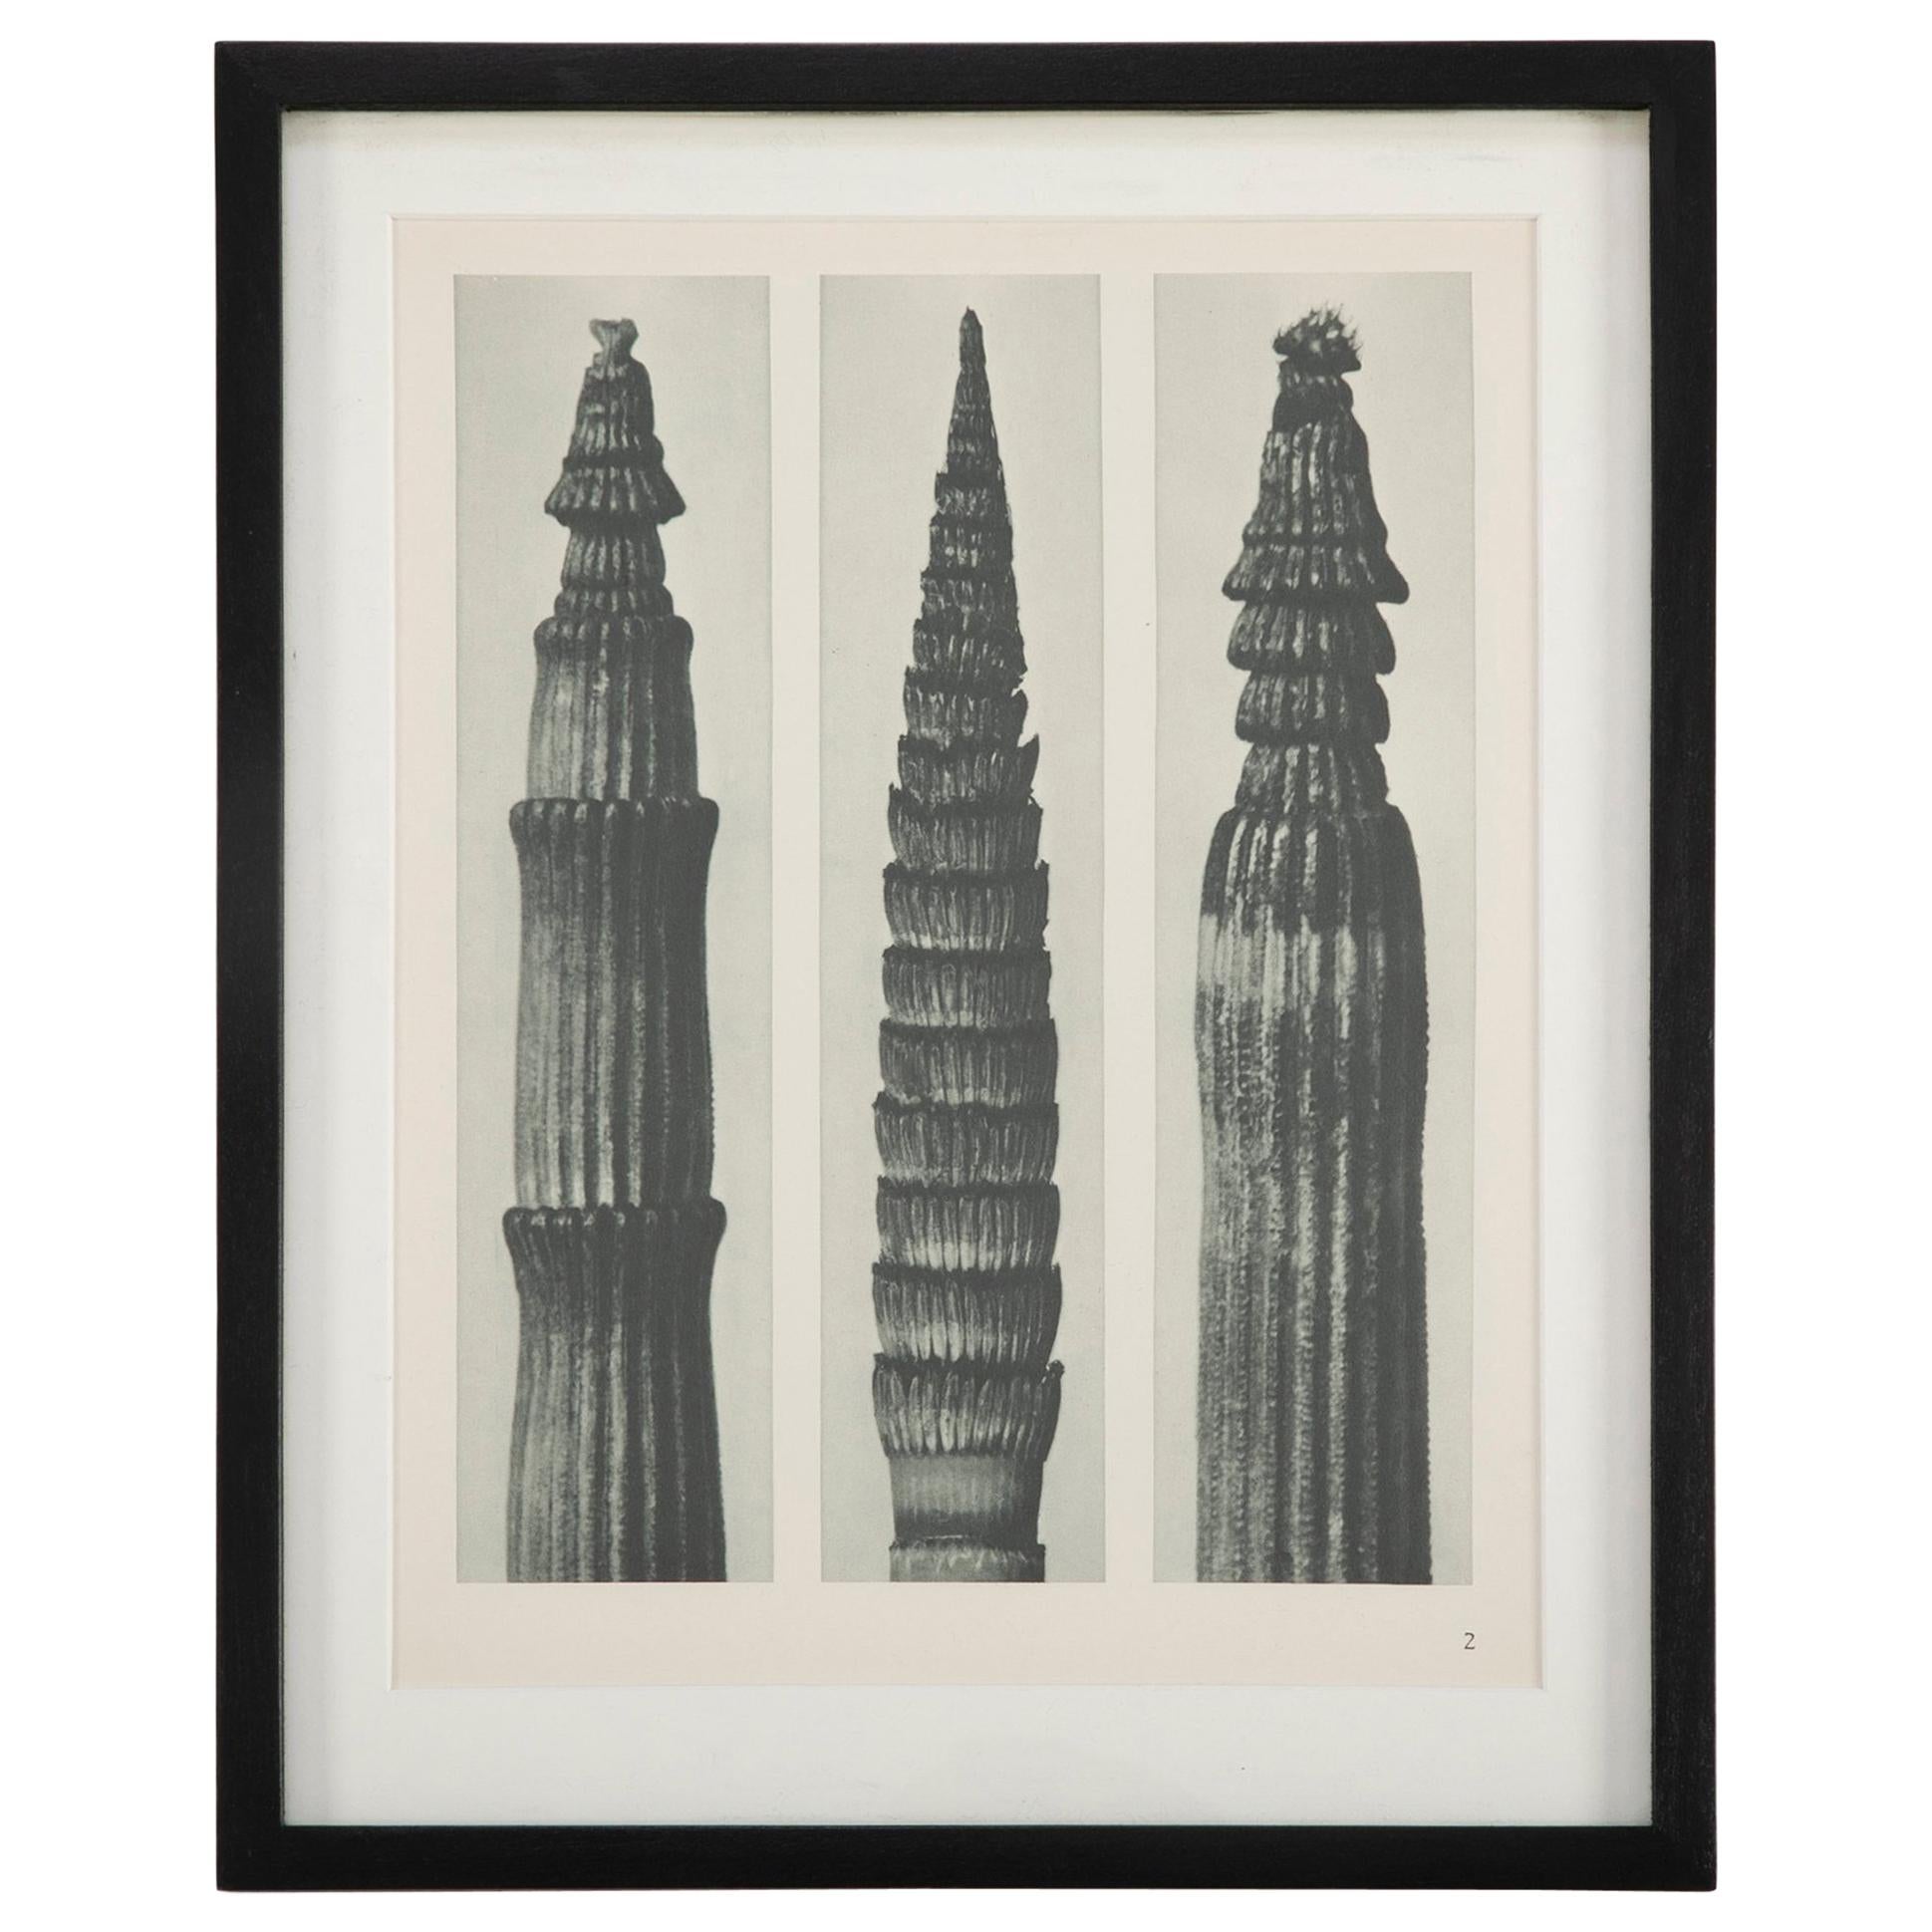 Eight botanical photogravures by Karl Blossfeldt (German, b. 1914 - d. 1932), First Edition 1928, Berlin. Blossfeldt was a well-known artist, teacher, sculptor and photographer; best known for his closeup photographs of plant life. Hung together,